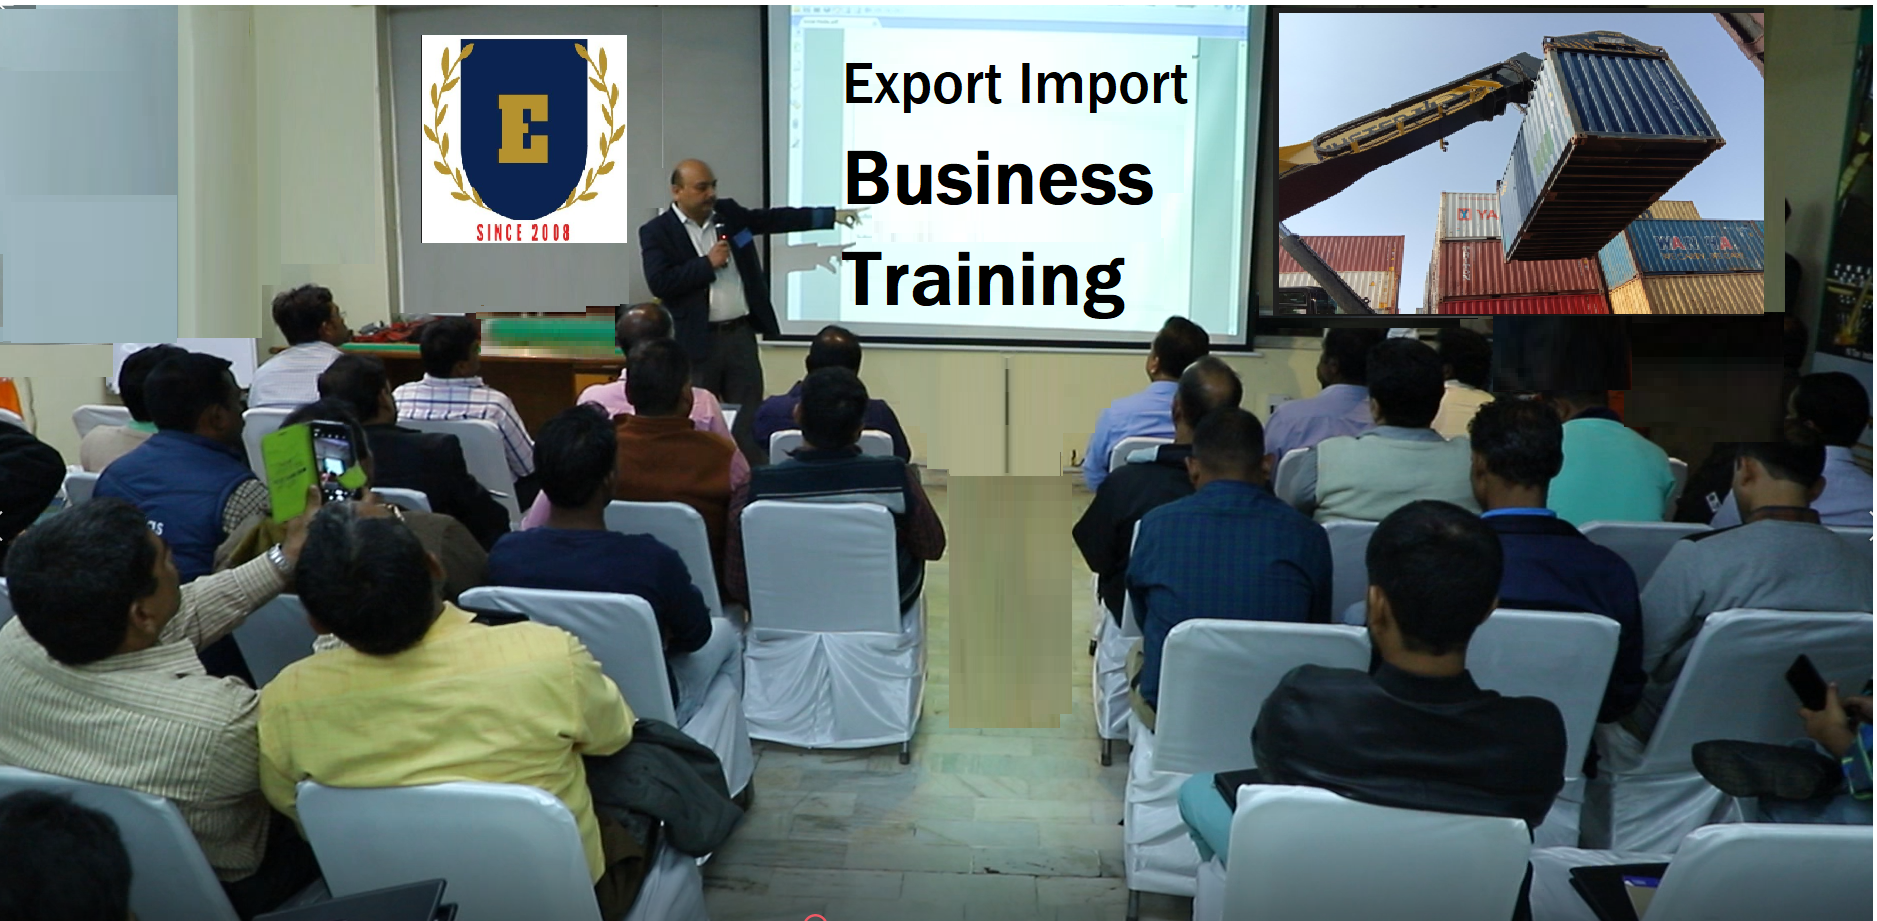 Export Import Business Training Session